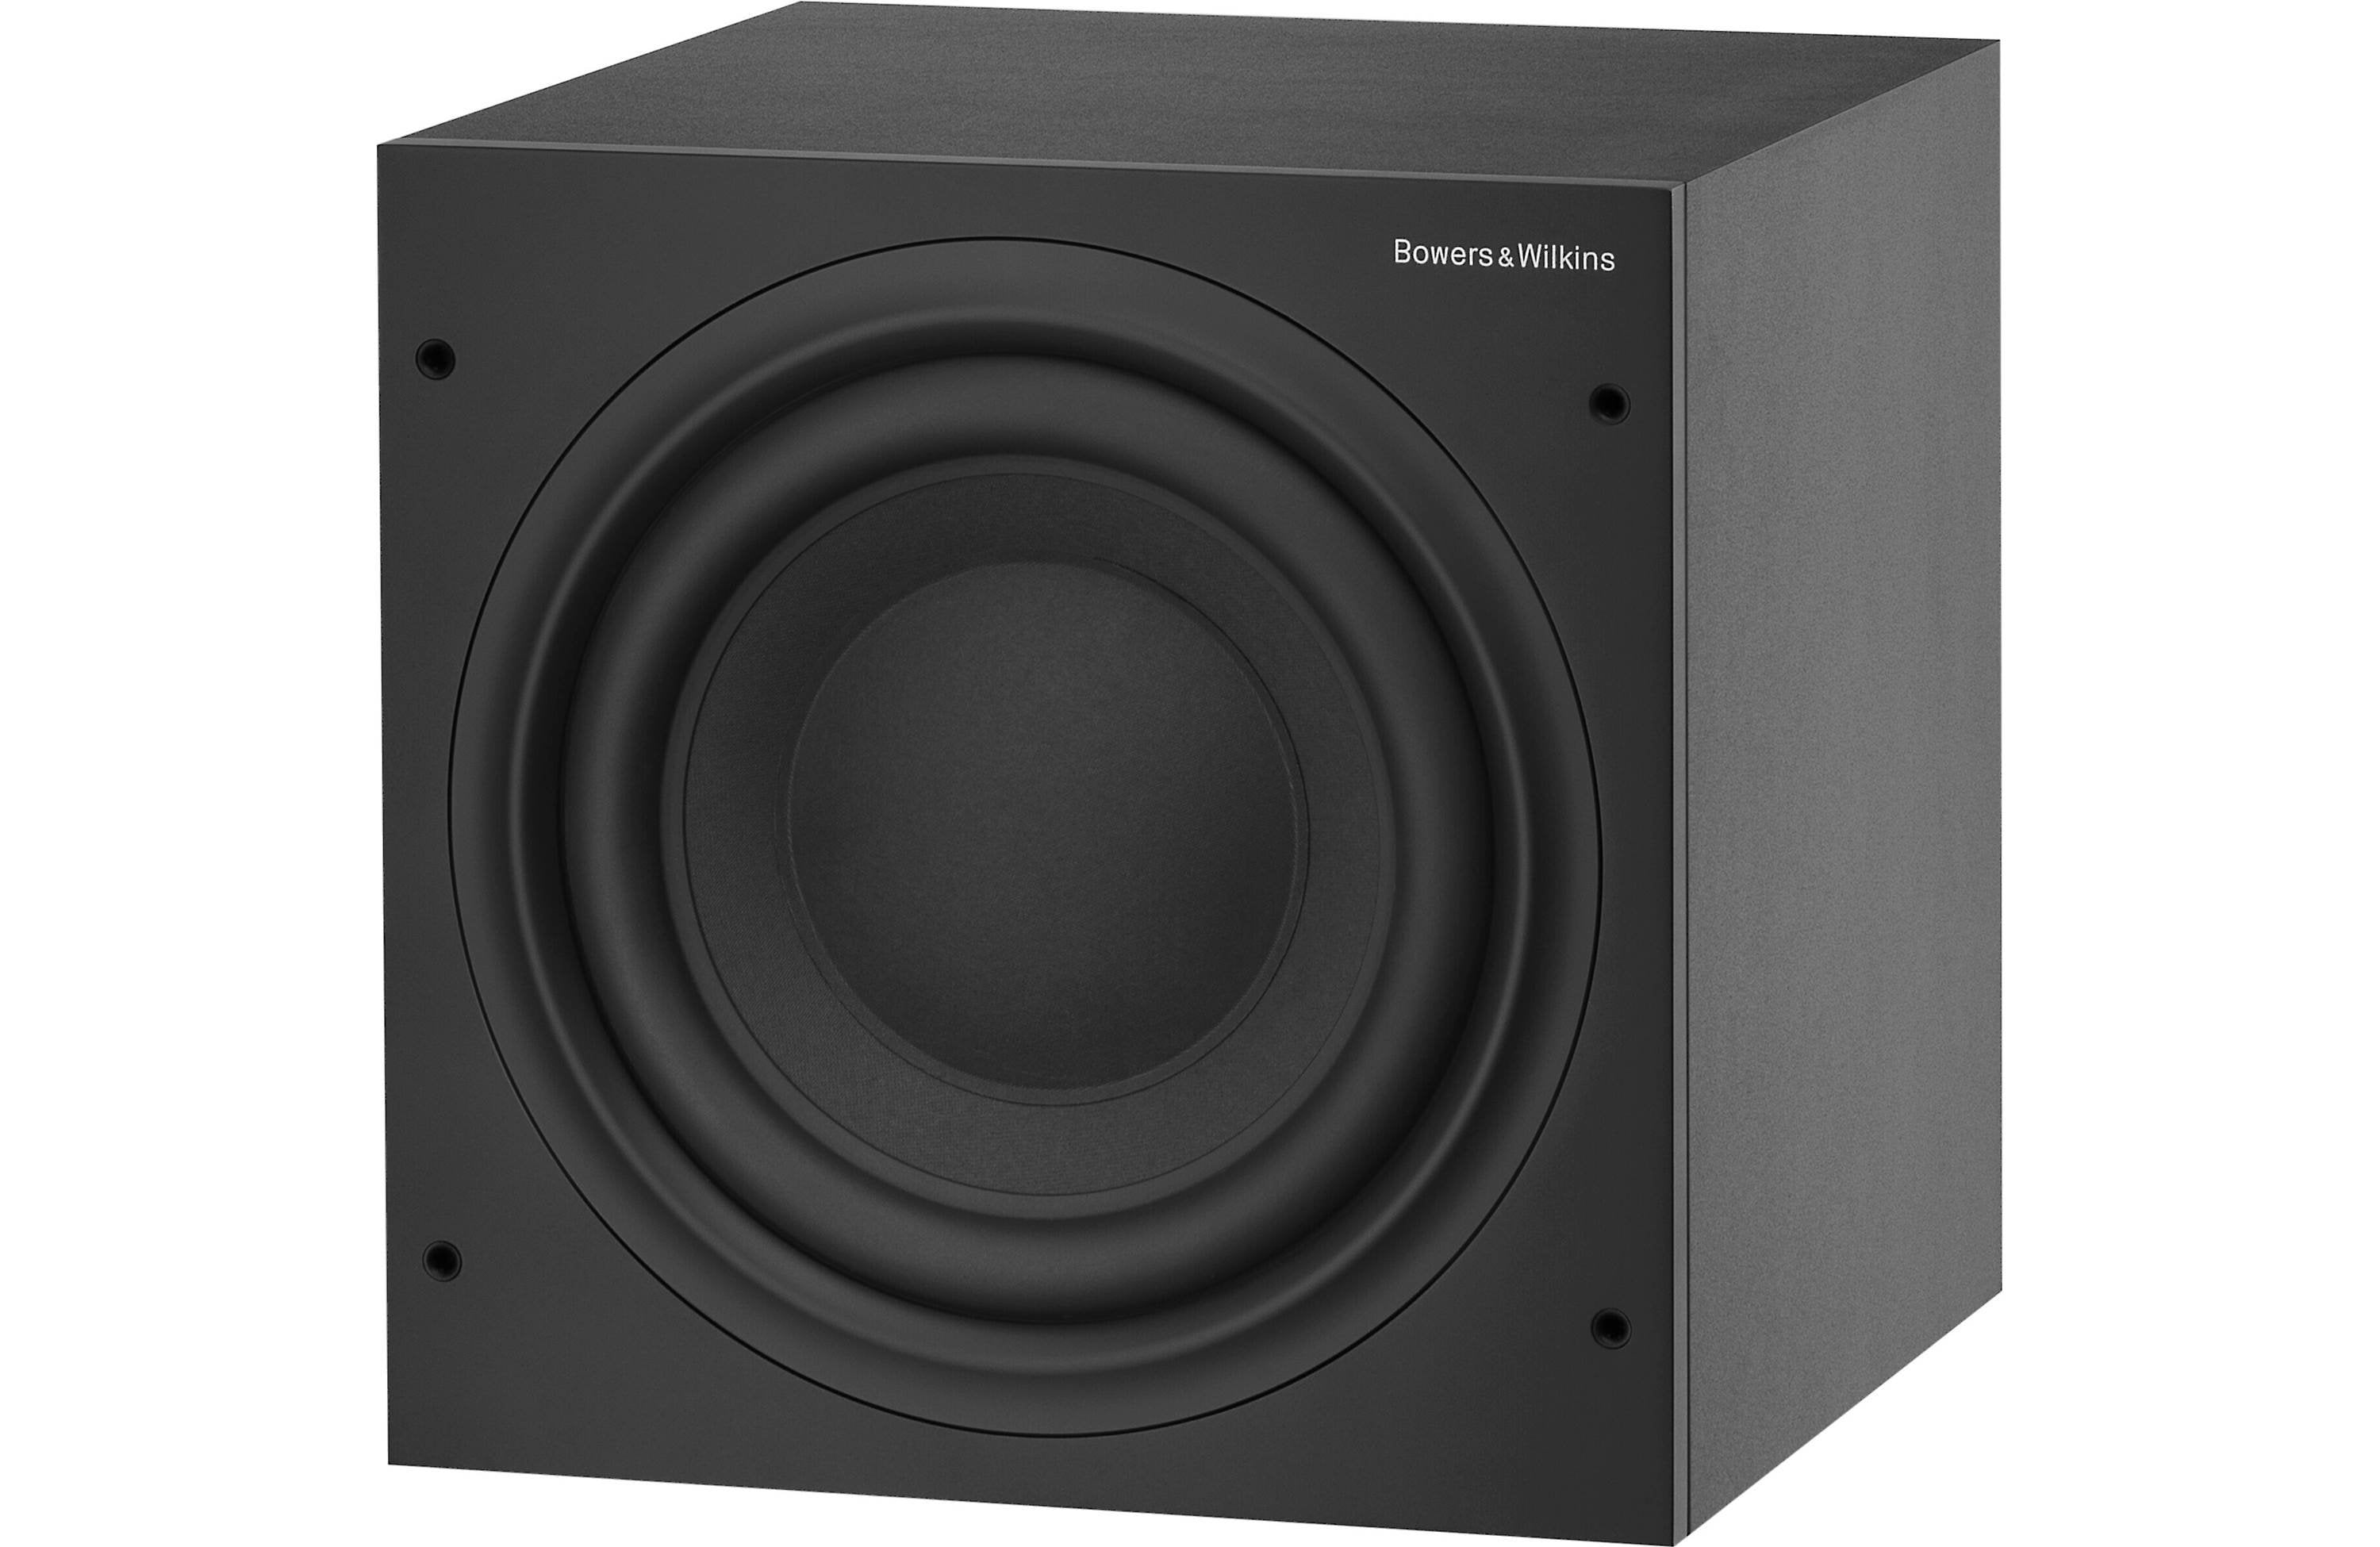 Bowers & Wilkins ASW610 - 10" 200W Active Subwoofer (Certified Refurbished)